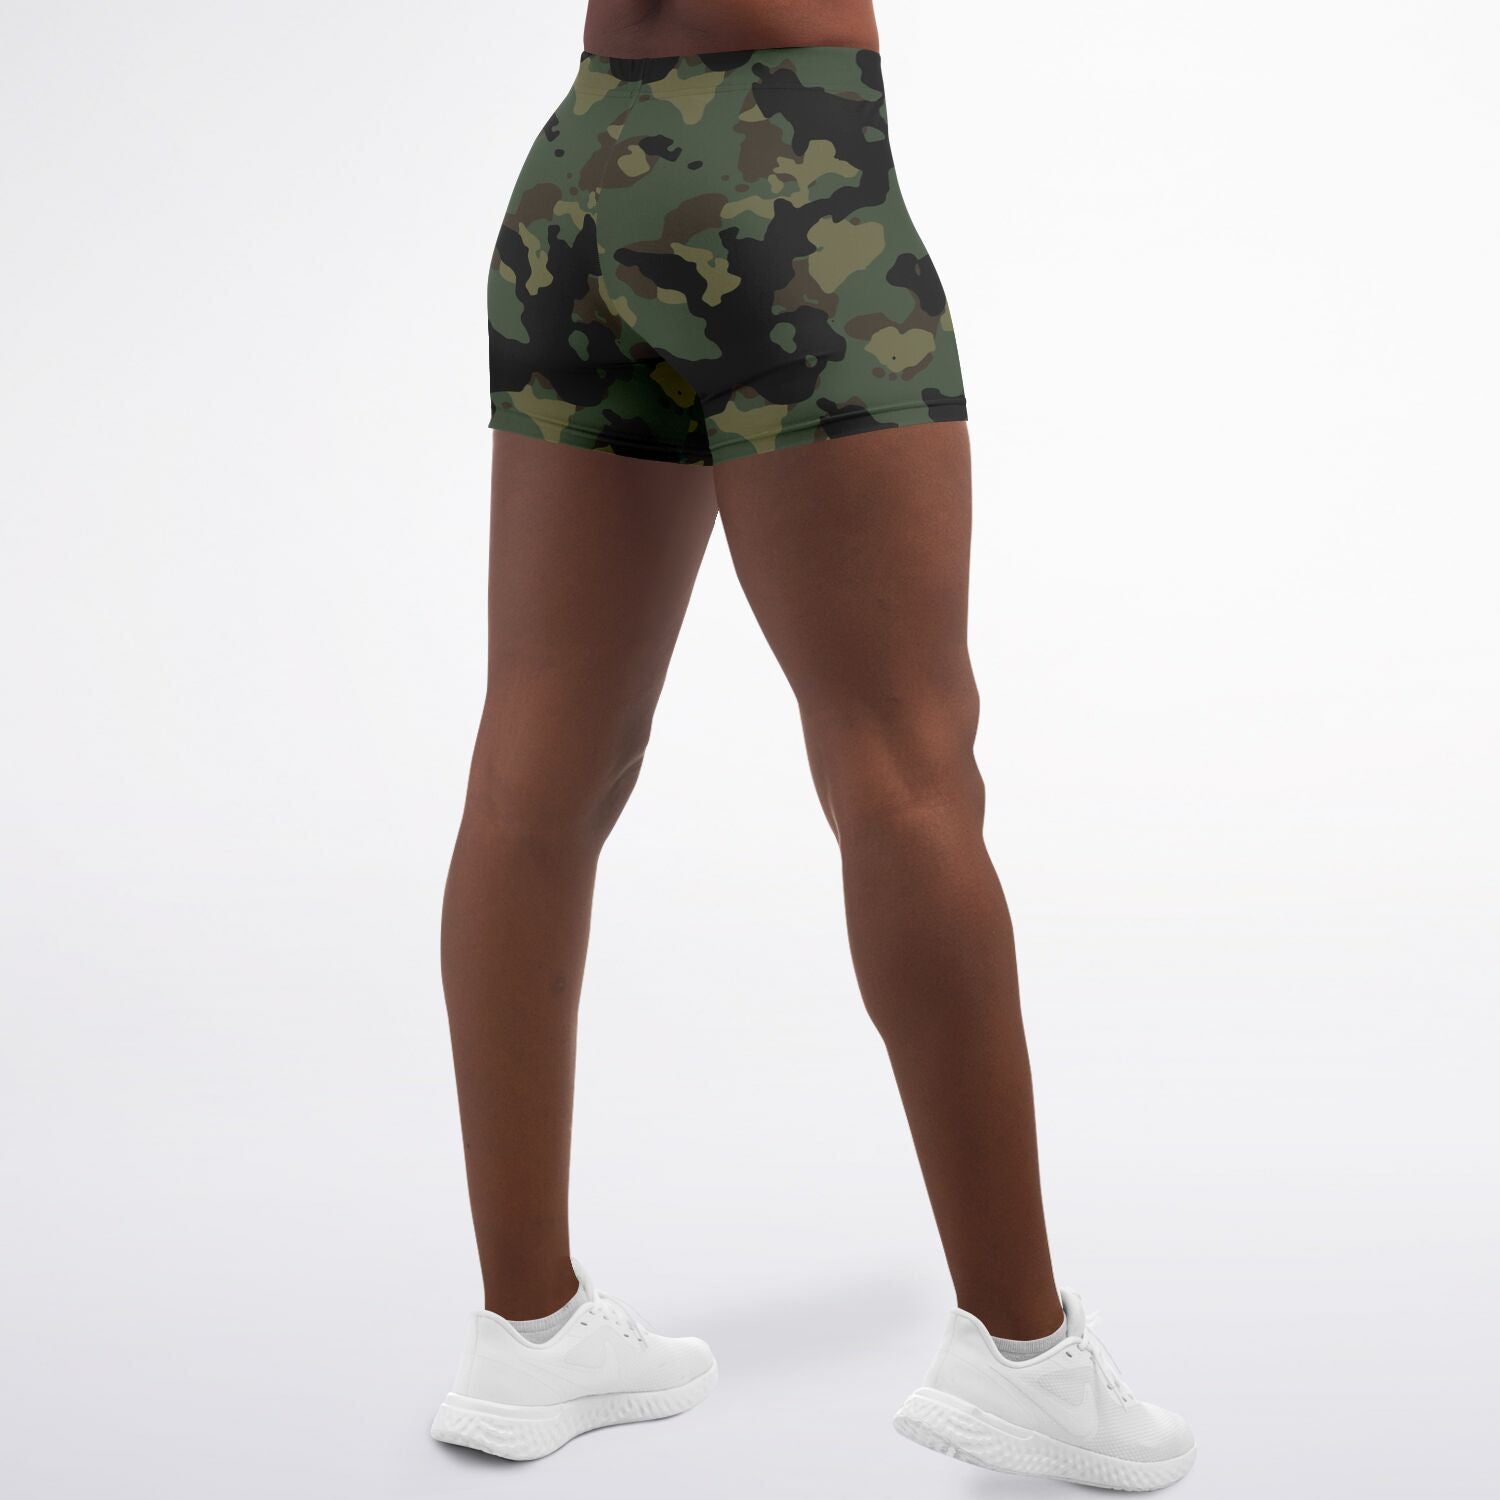 Women's Mid-rise Deep Jungle Military Camouflage Athletic Booty Shorts